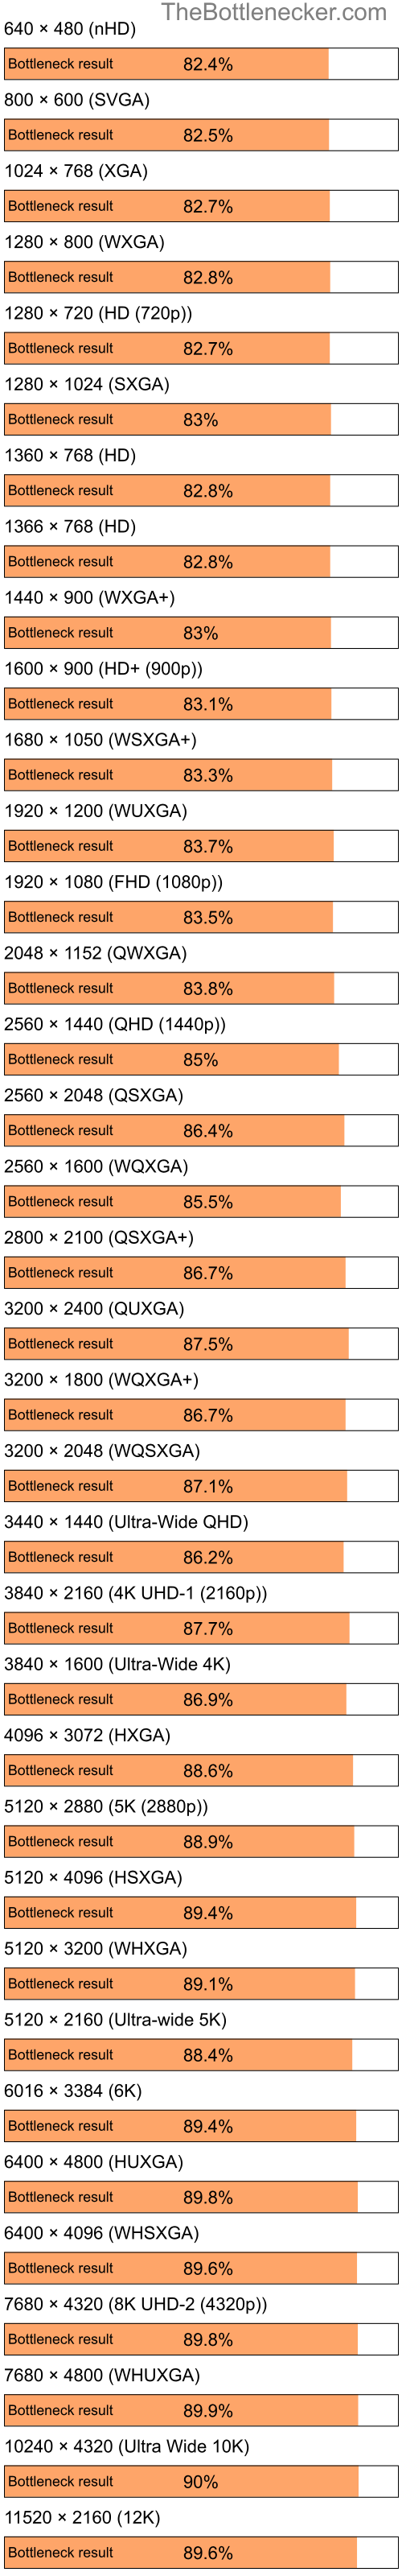 Bottleneck results by resolution for Intel Atom Z520 and NVIDIA GeForce Go 6150 in7 Days to Die